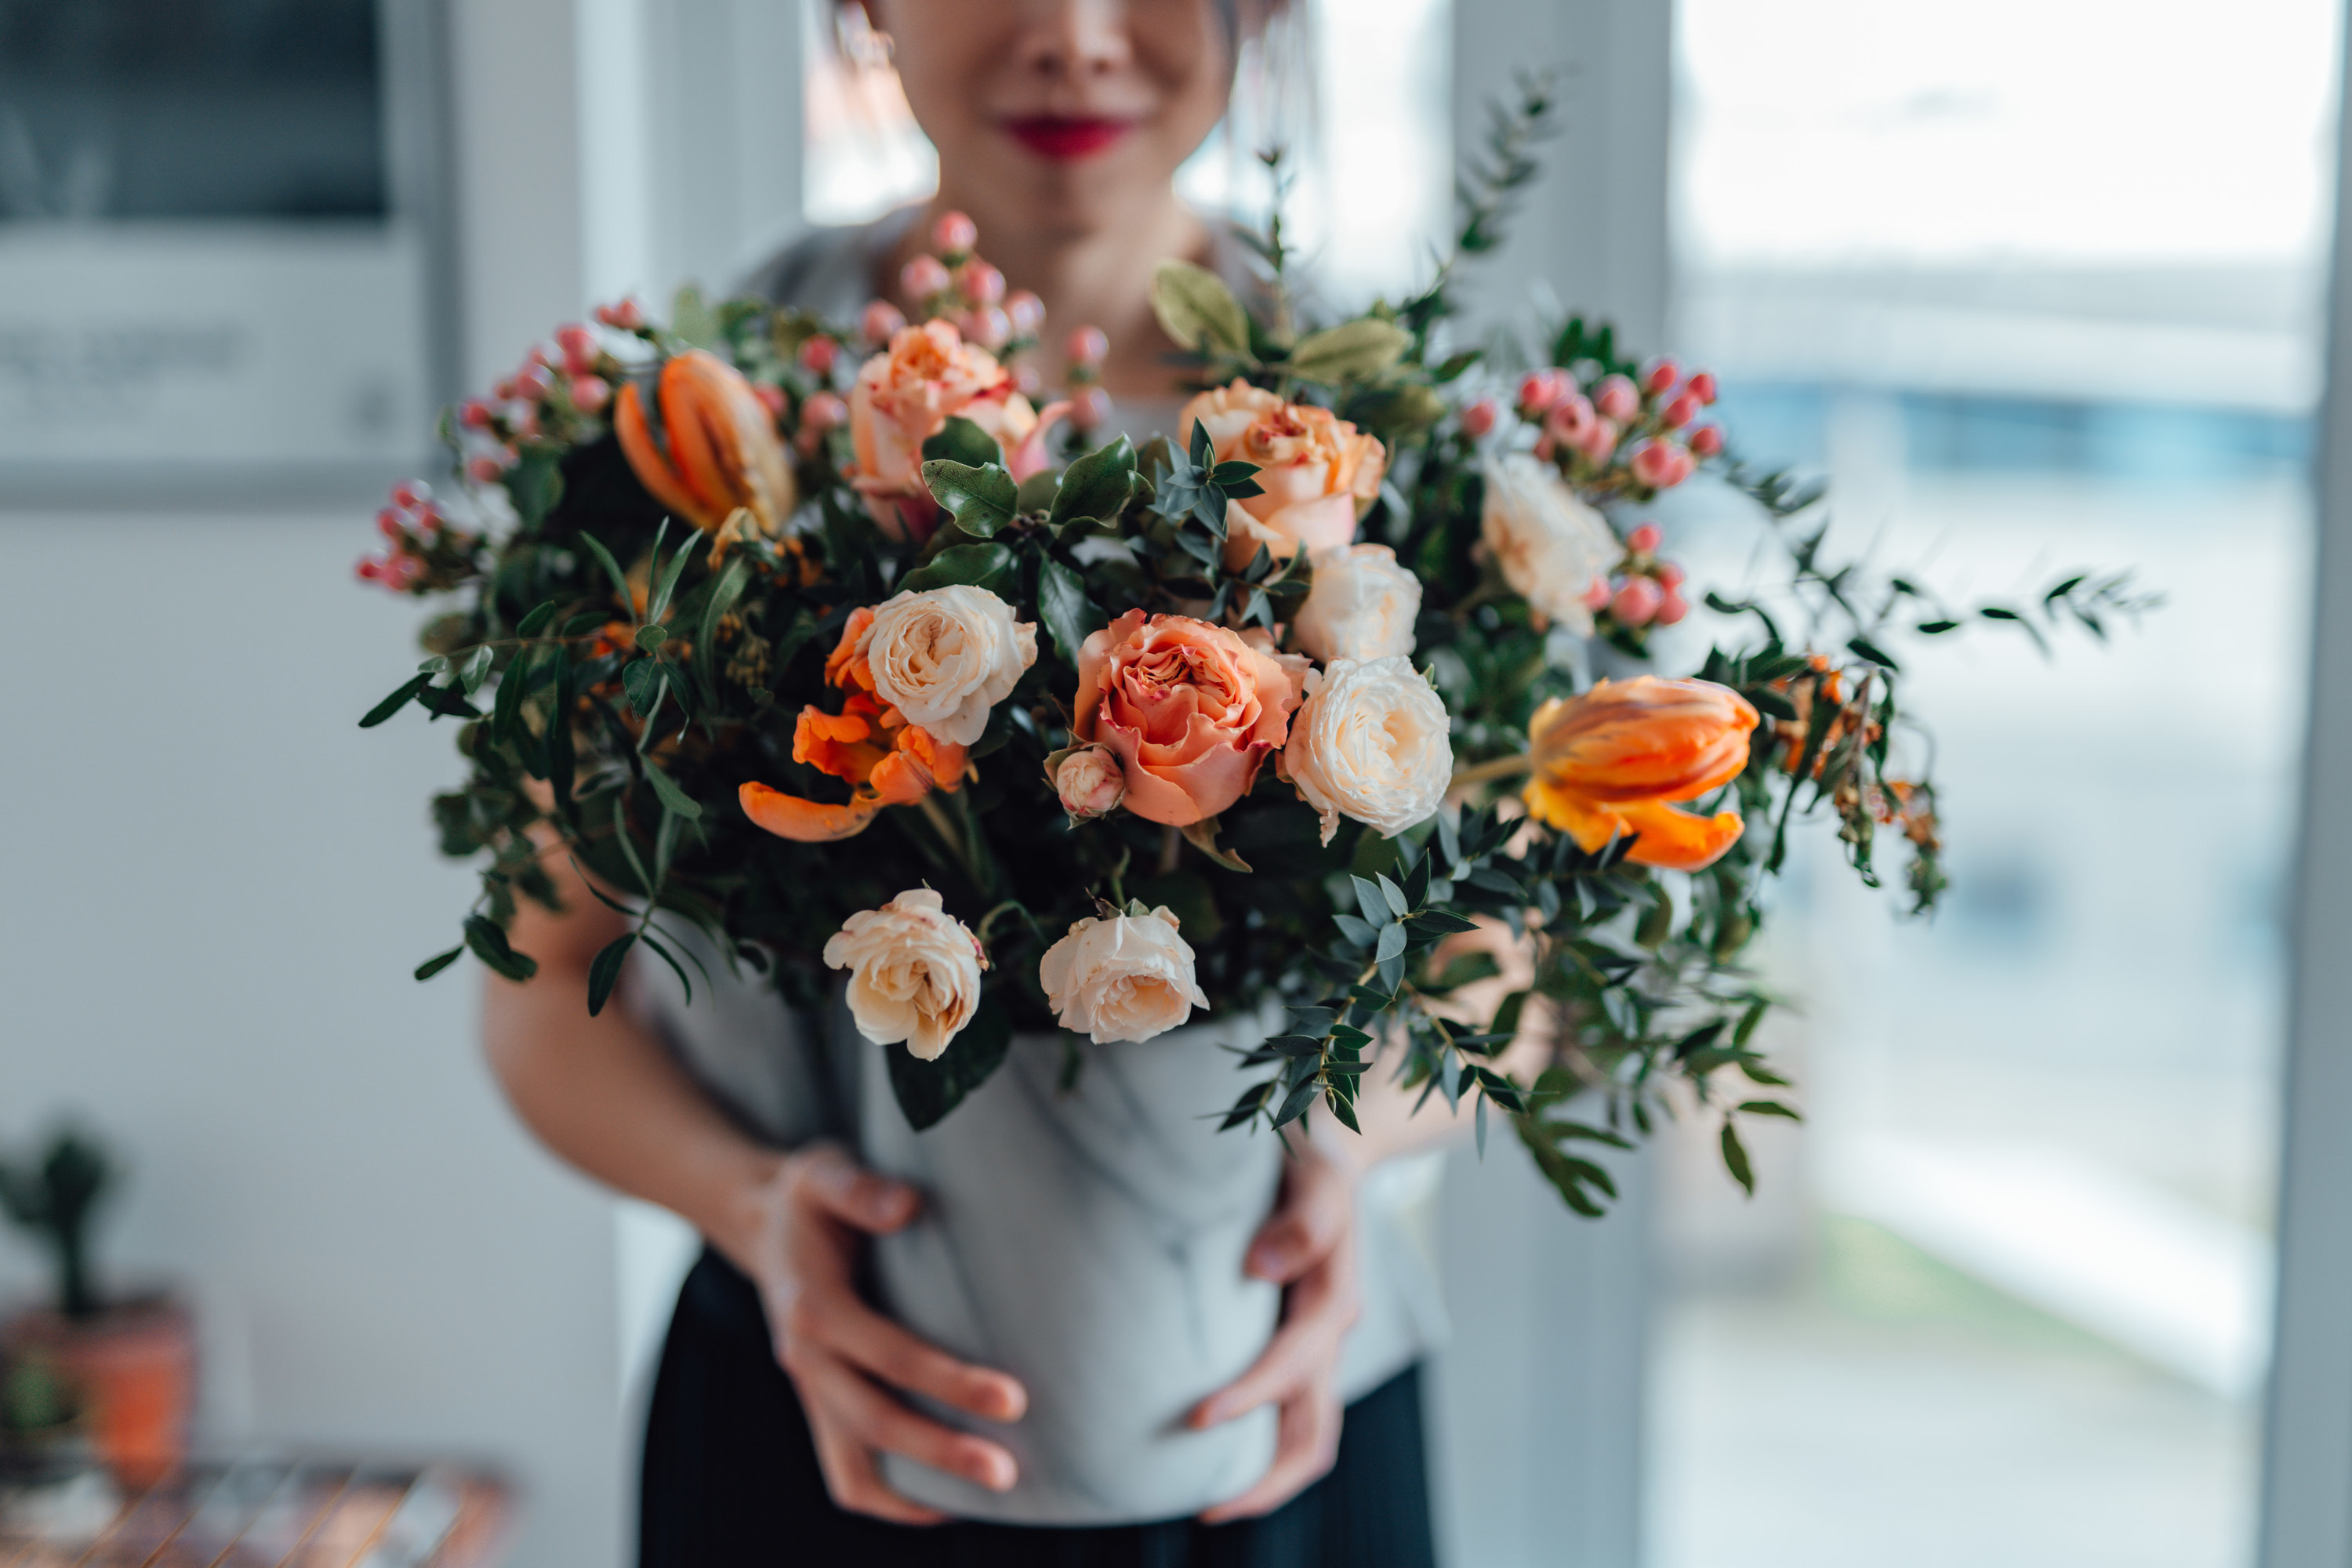 A woman holding fresh flowers